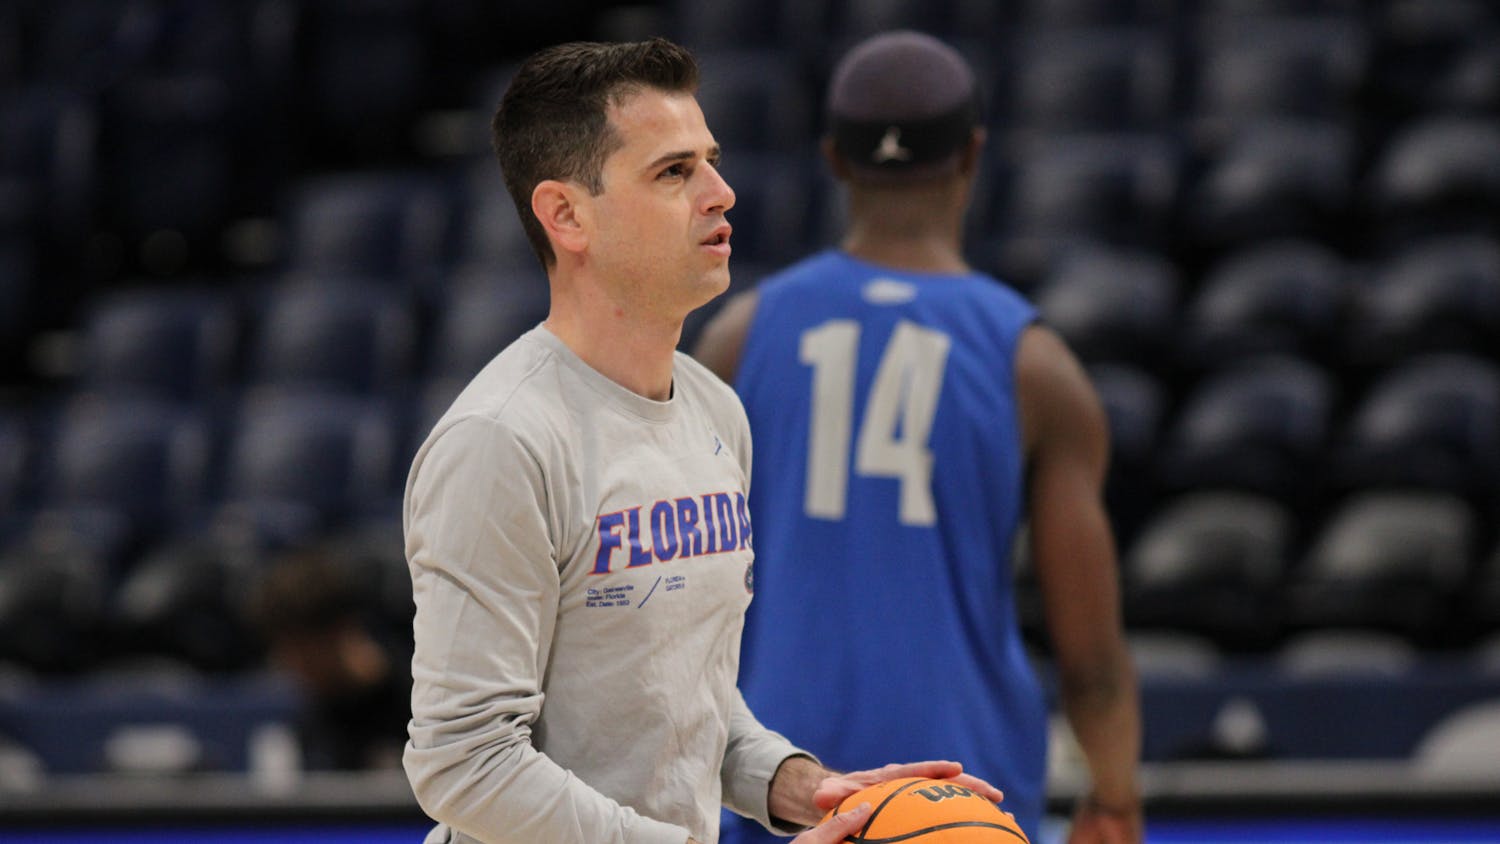 Florida Gators head coach Todd Golden holds a ball during a a practice before the SEC men's basketball tournament Wednesday, March 8, 2023.